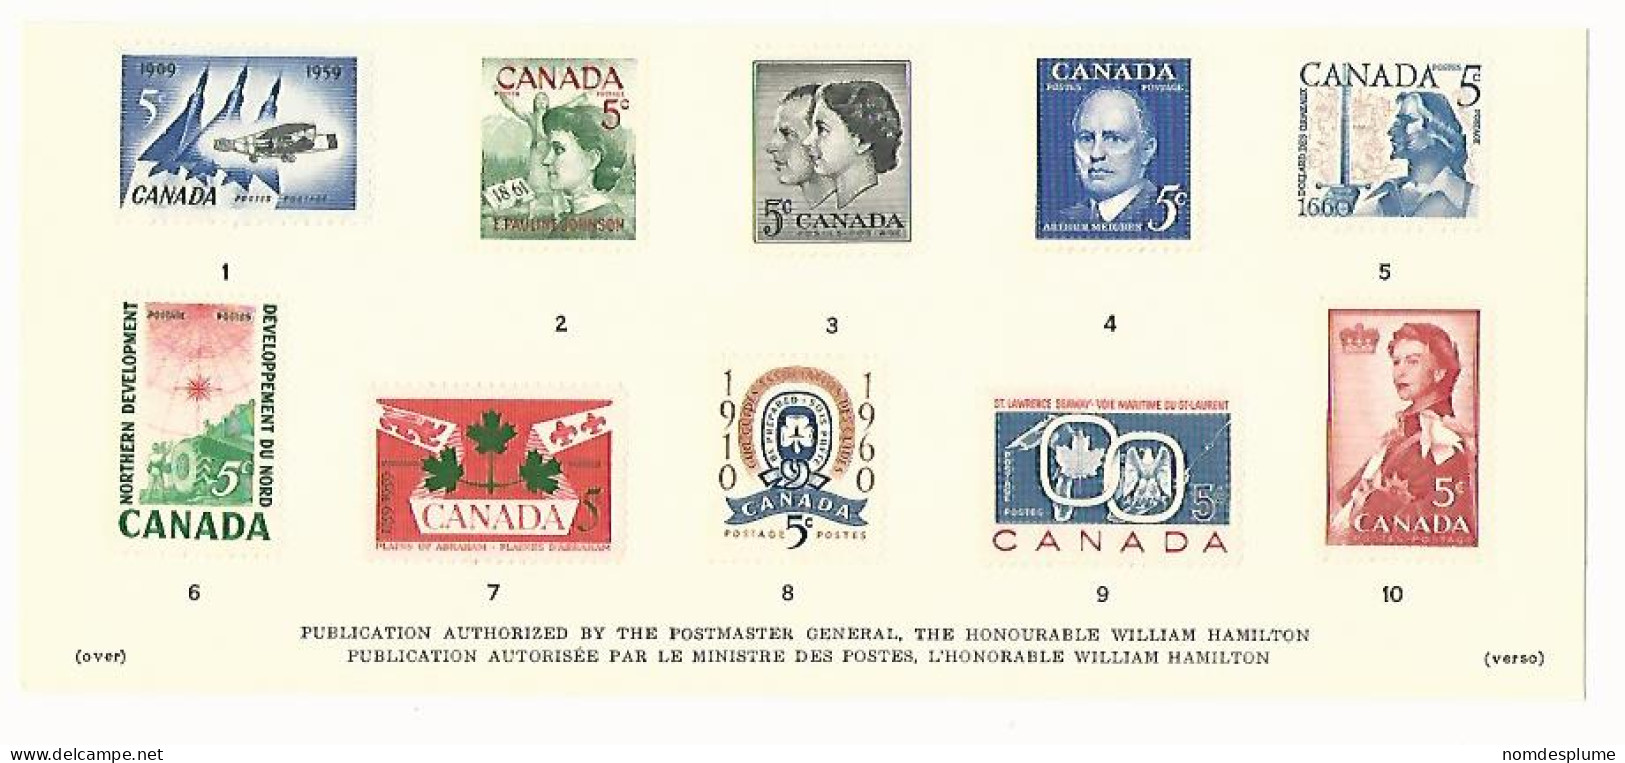 58193) Canada Commemorative Issues Canadian History In Postage Stamps Series #3 - Pochettes Postales Annuelles